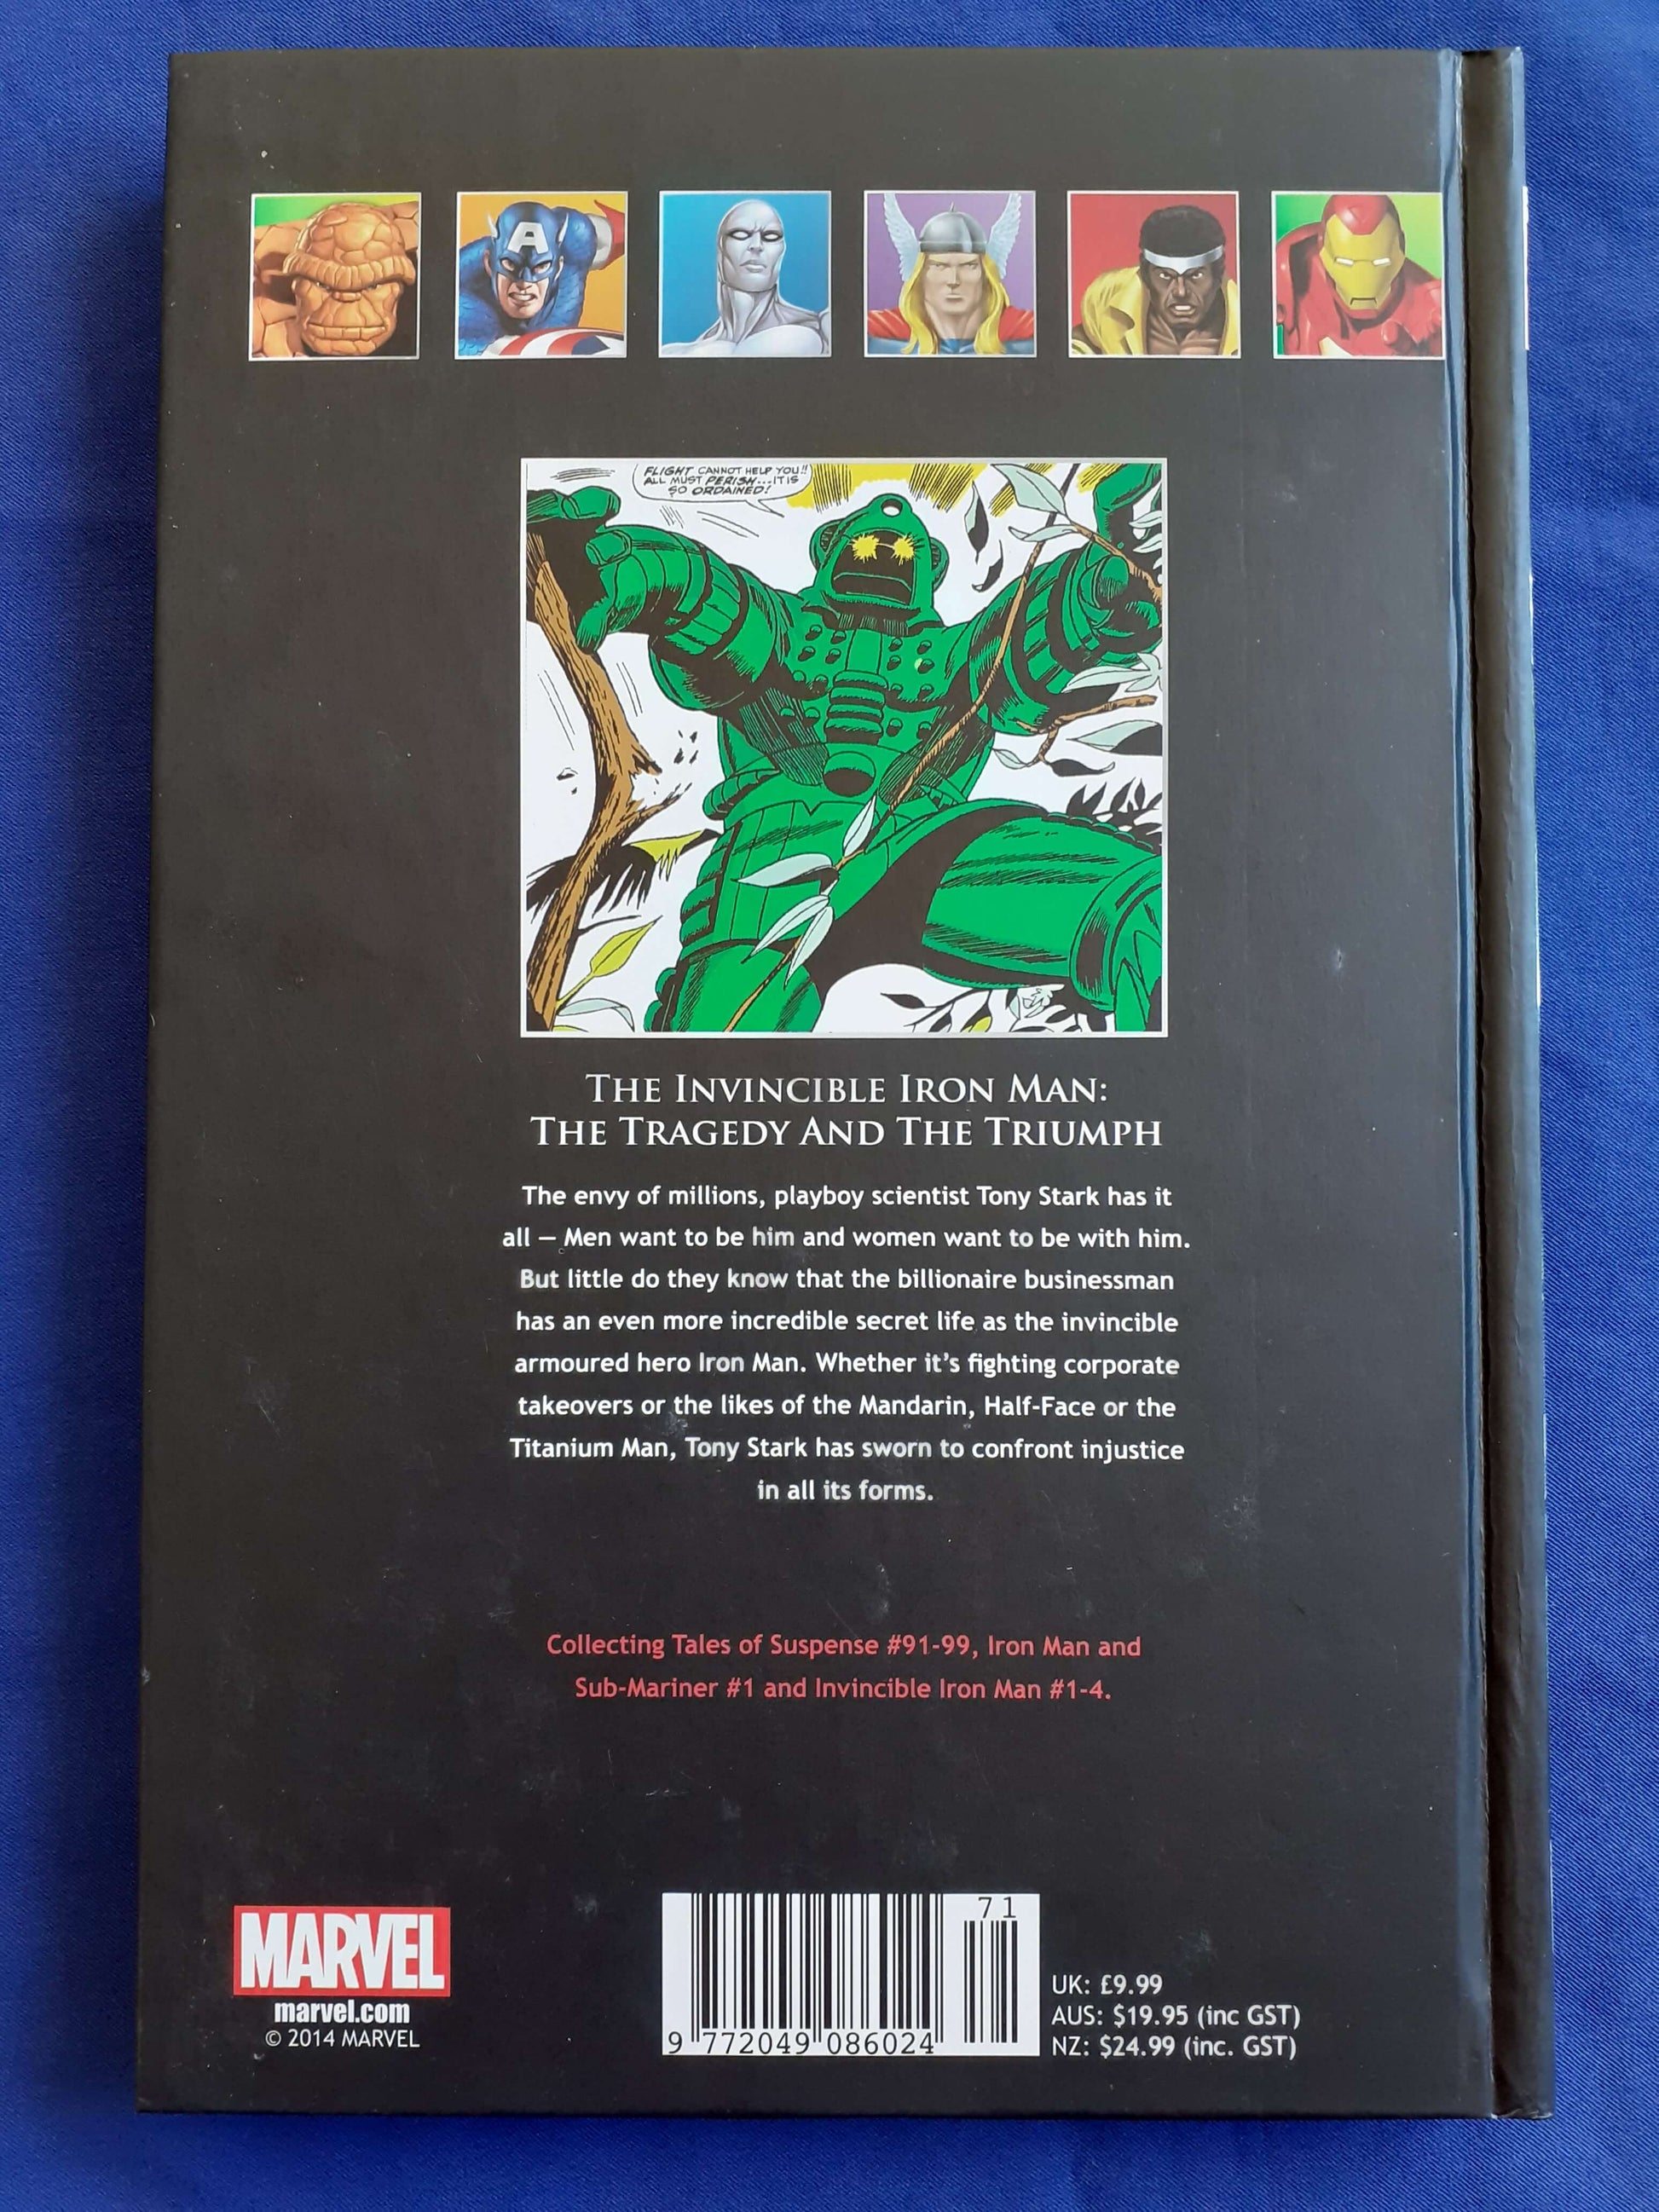 graphic novel, iron man, marvel graphic novels, marvel ultimate graphic collection - Best Books